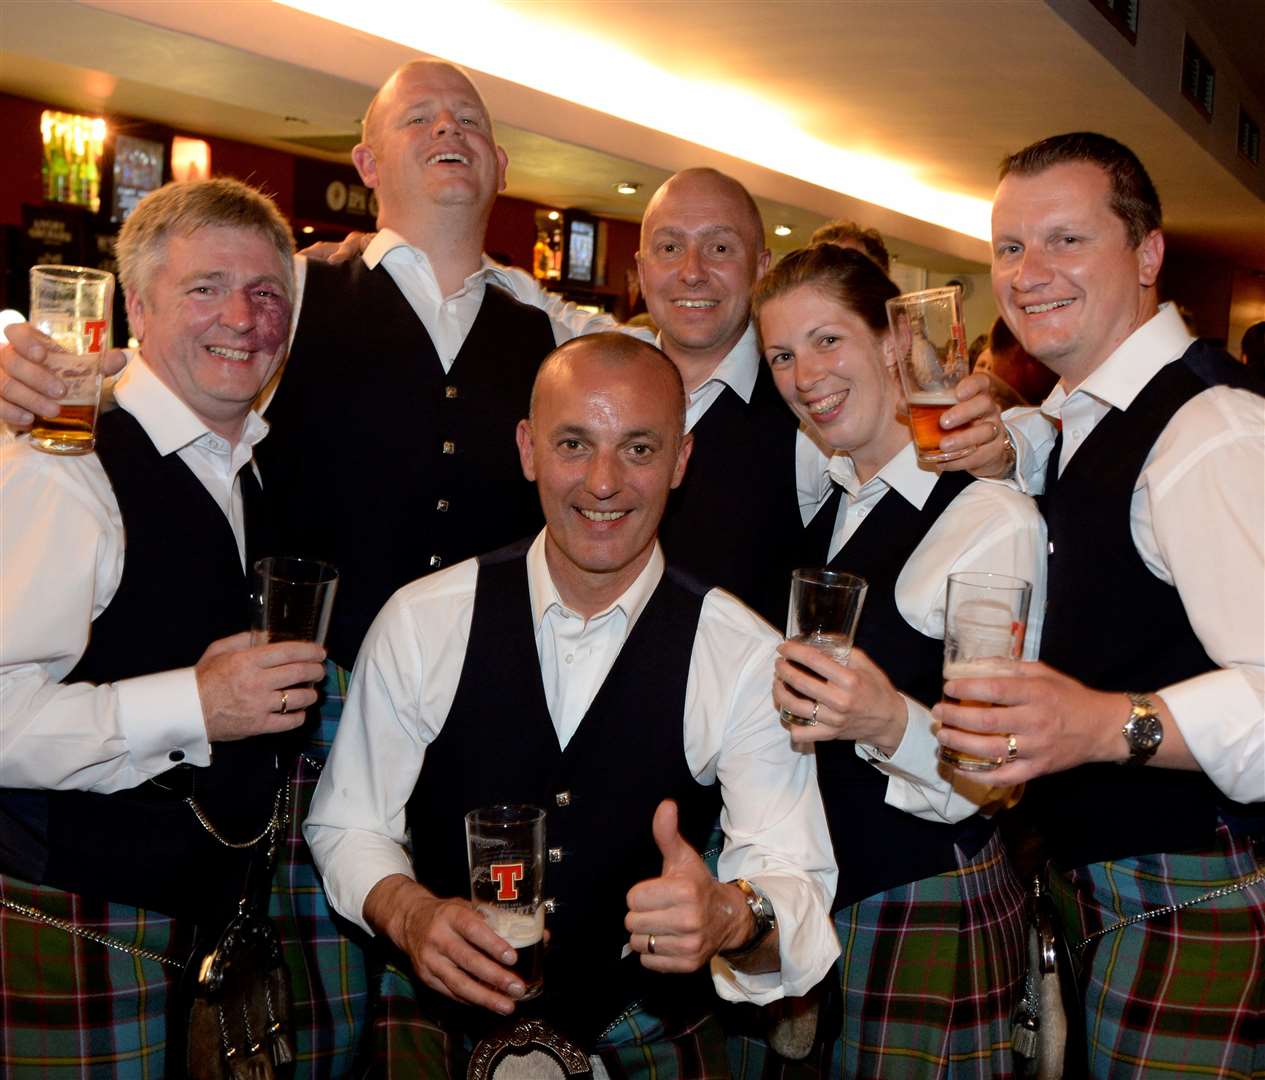 In need of a drink after competing in piping championship are the lads and lassies of Royal Burgh of Stirling pipe band